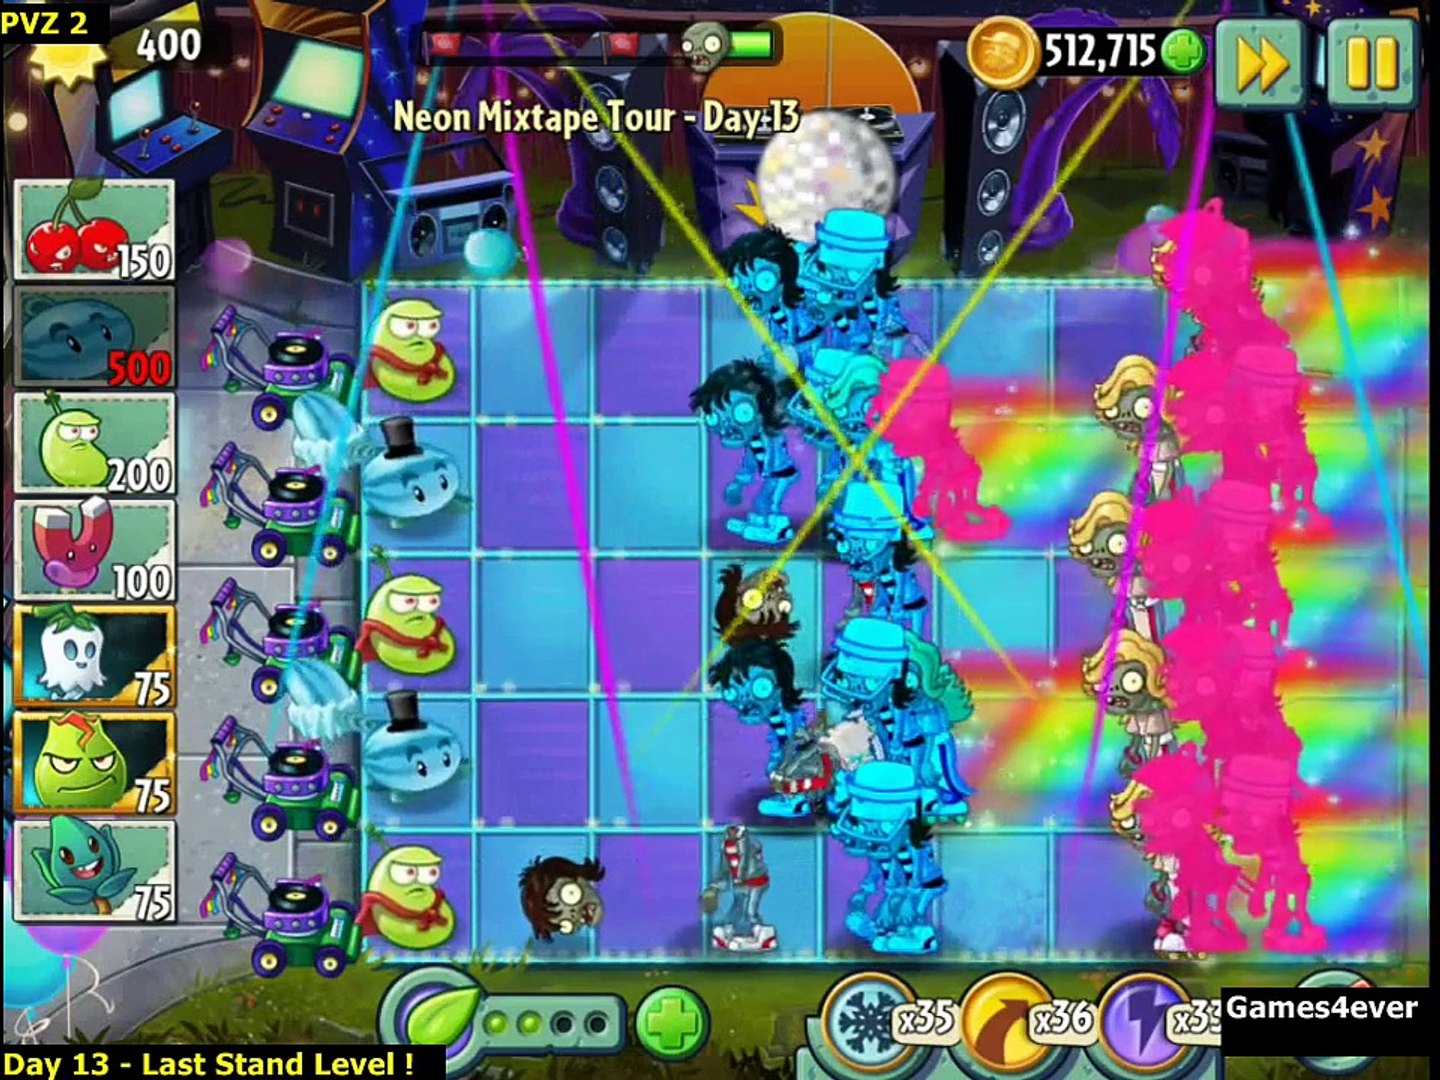 Plants Vs Zombies 2 Neon Mixtape Tour Side A Day 13 Last Stand